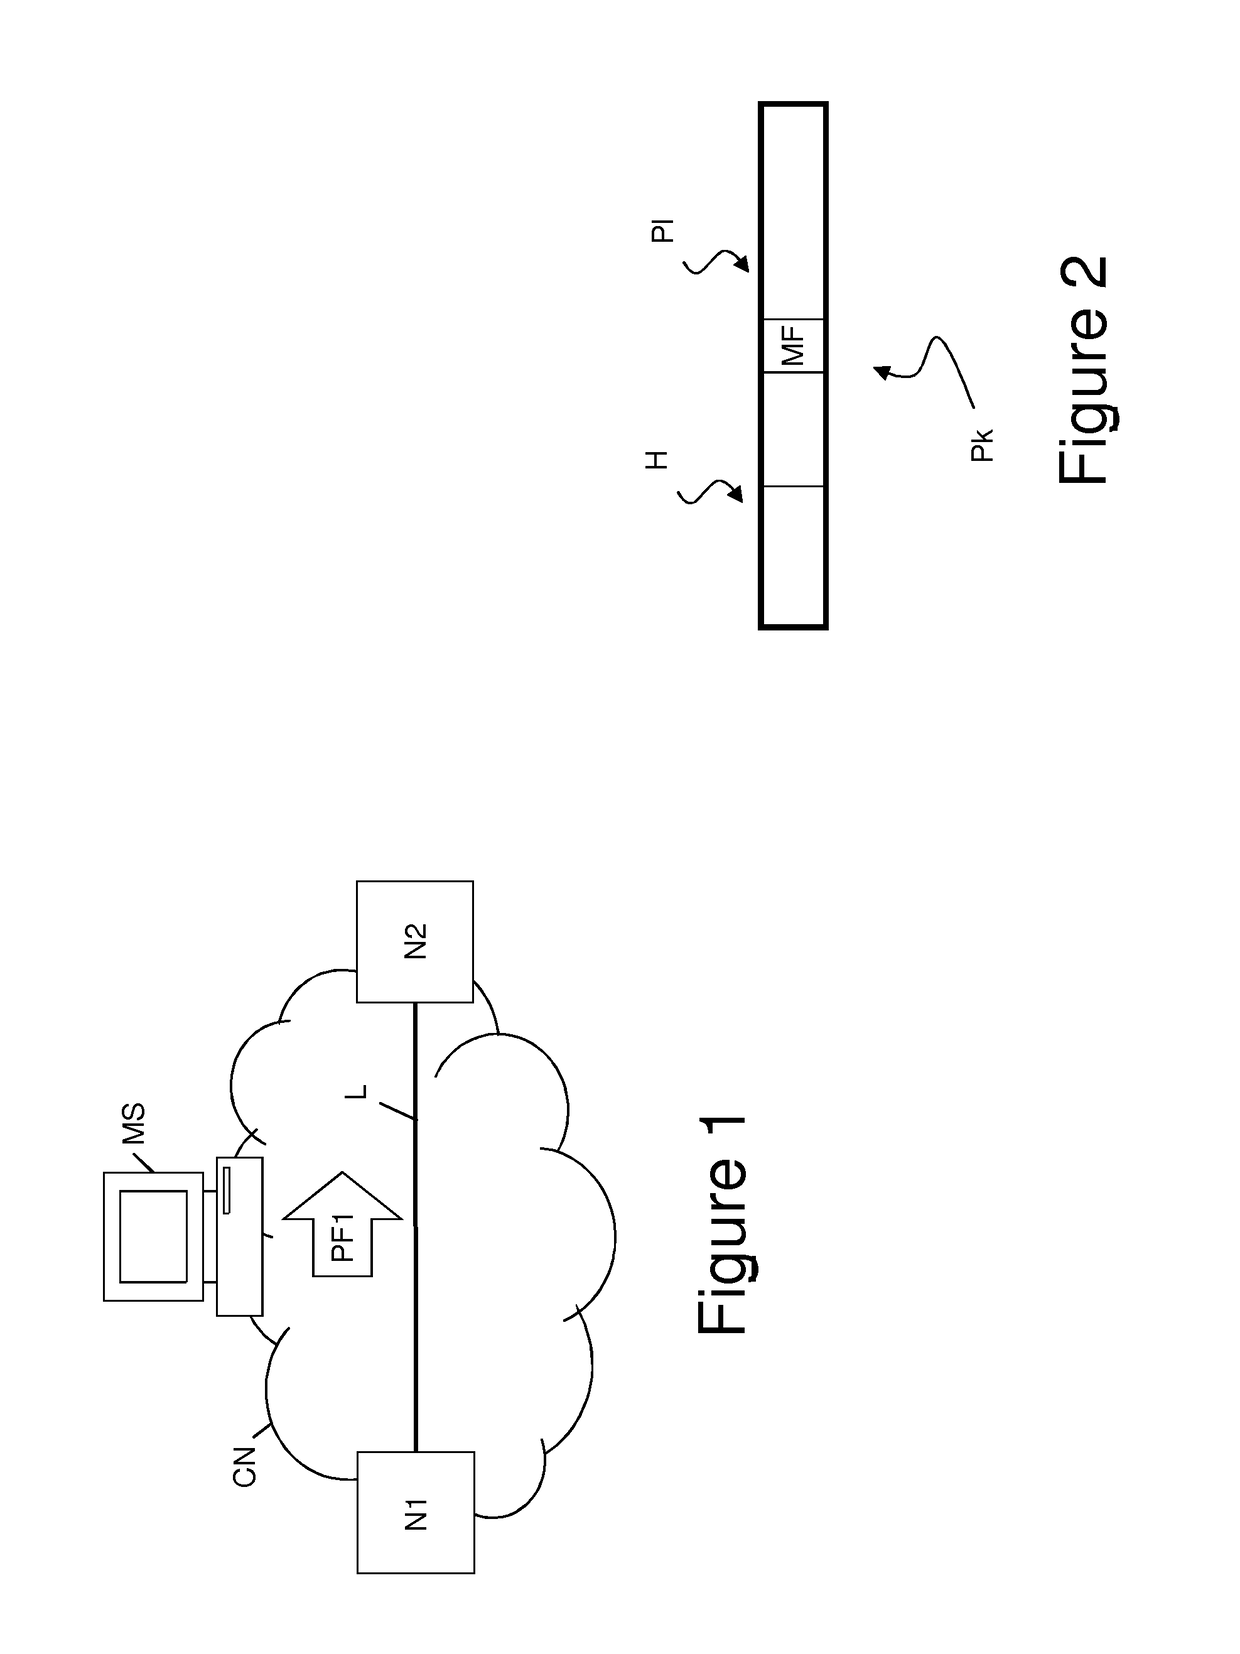 Performance measurement of a link of a packet-switched communication network